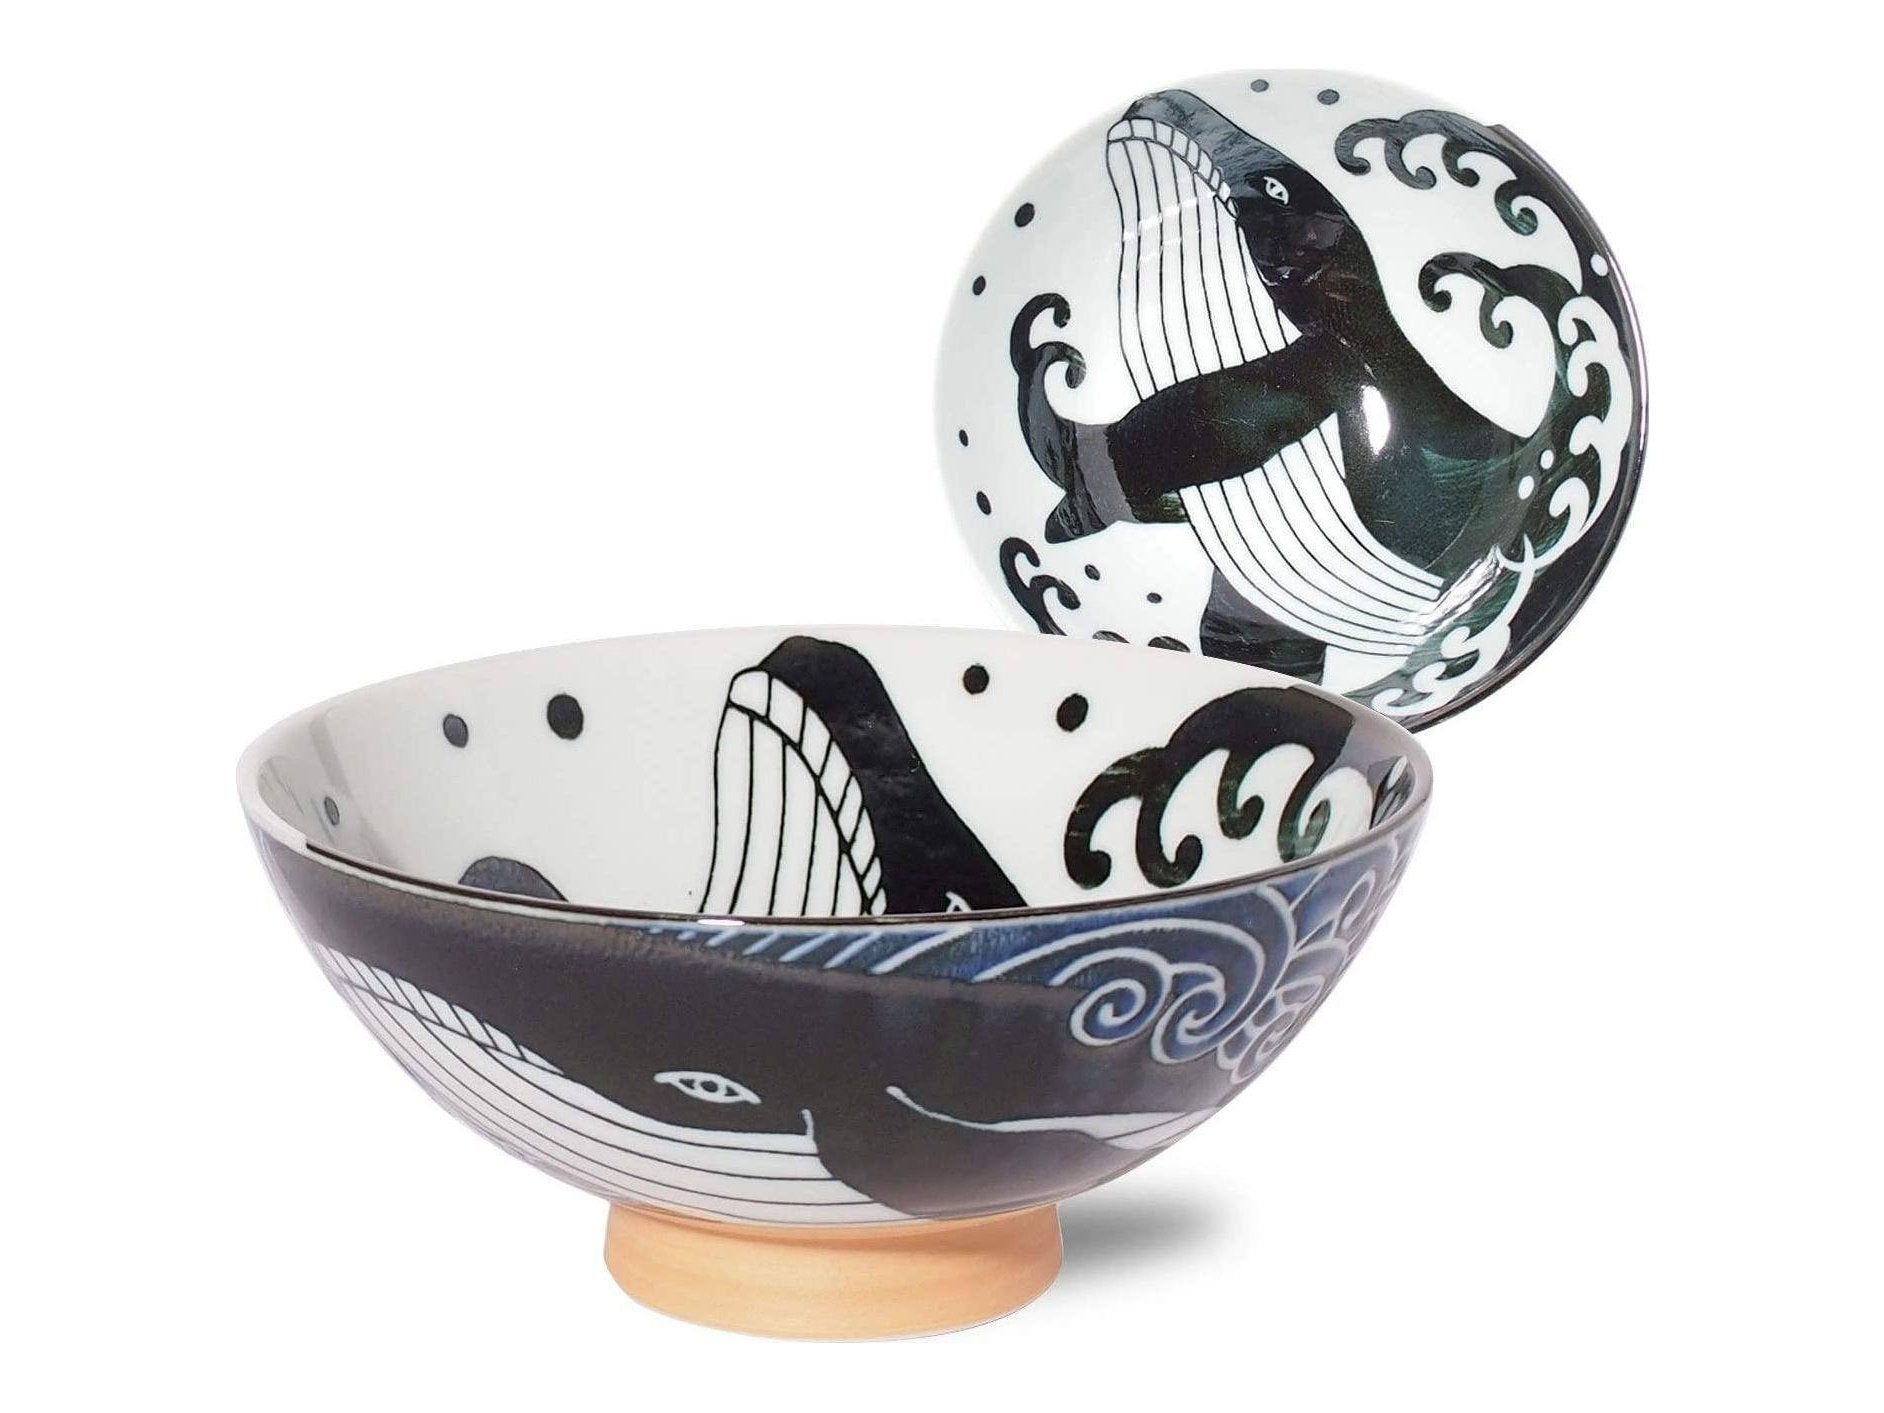 Mino White-Crested Waves Whale large Rice Bowl ×H cm